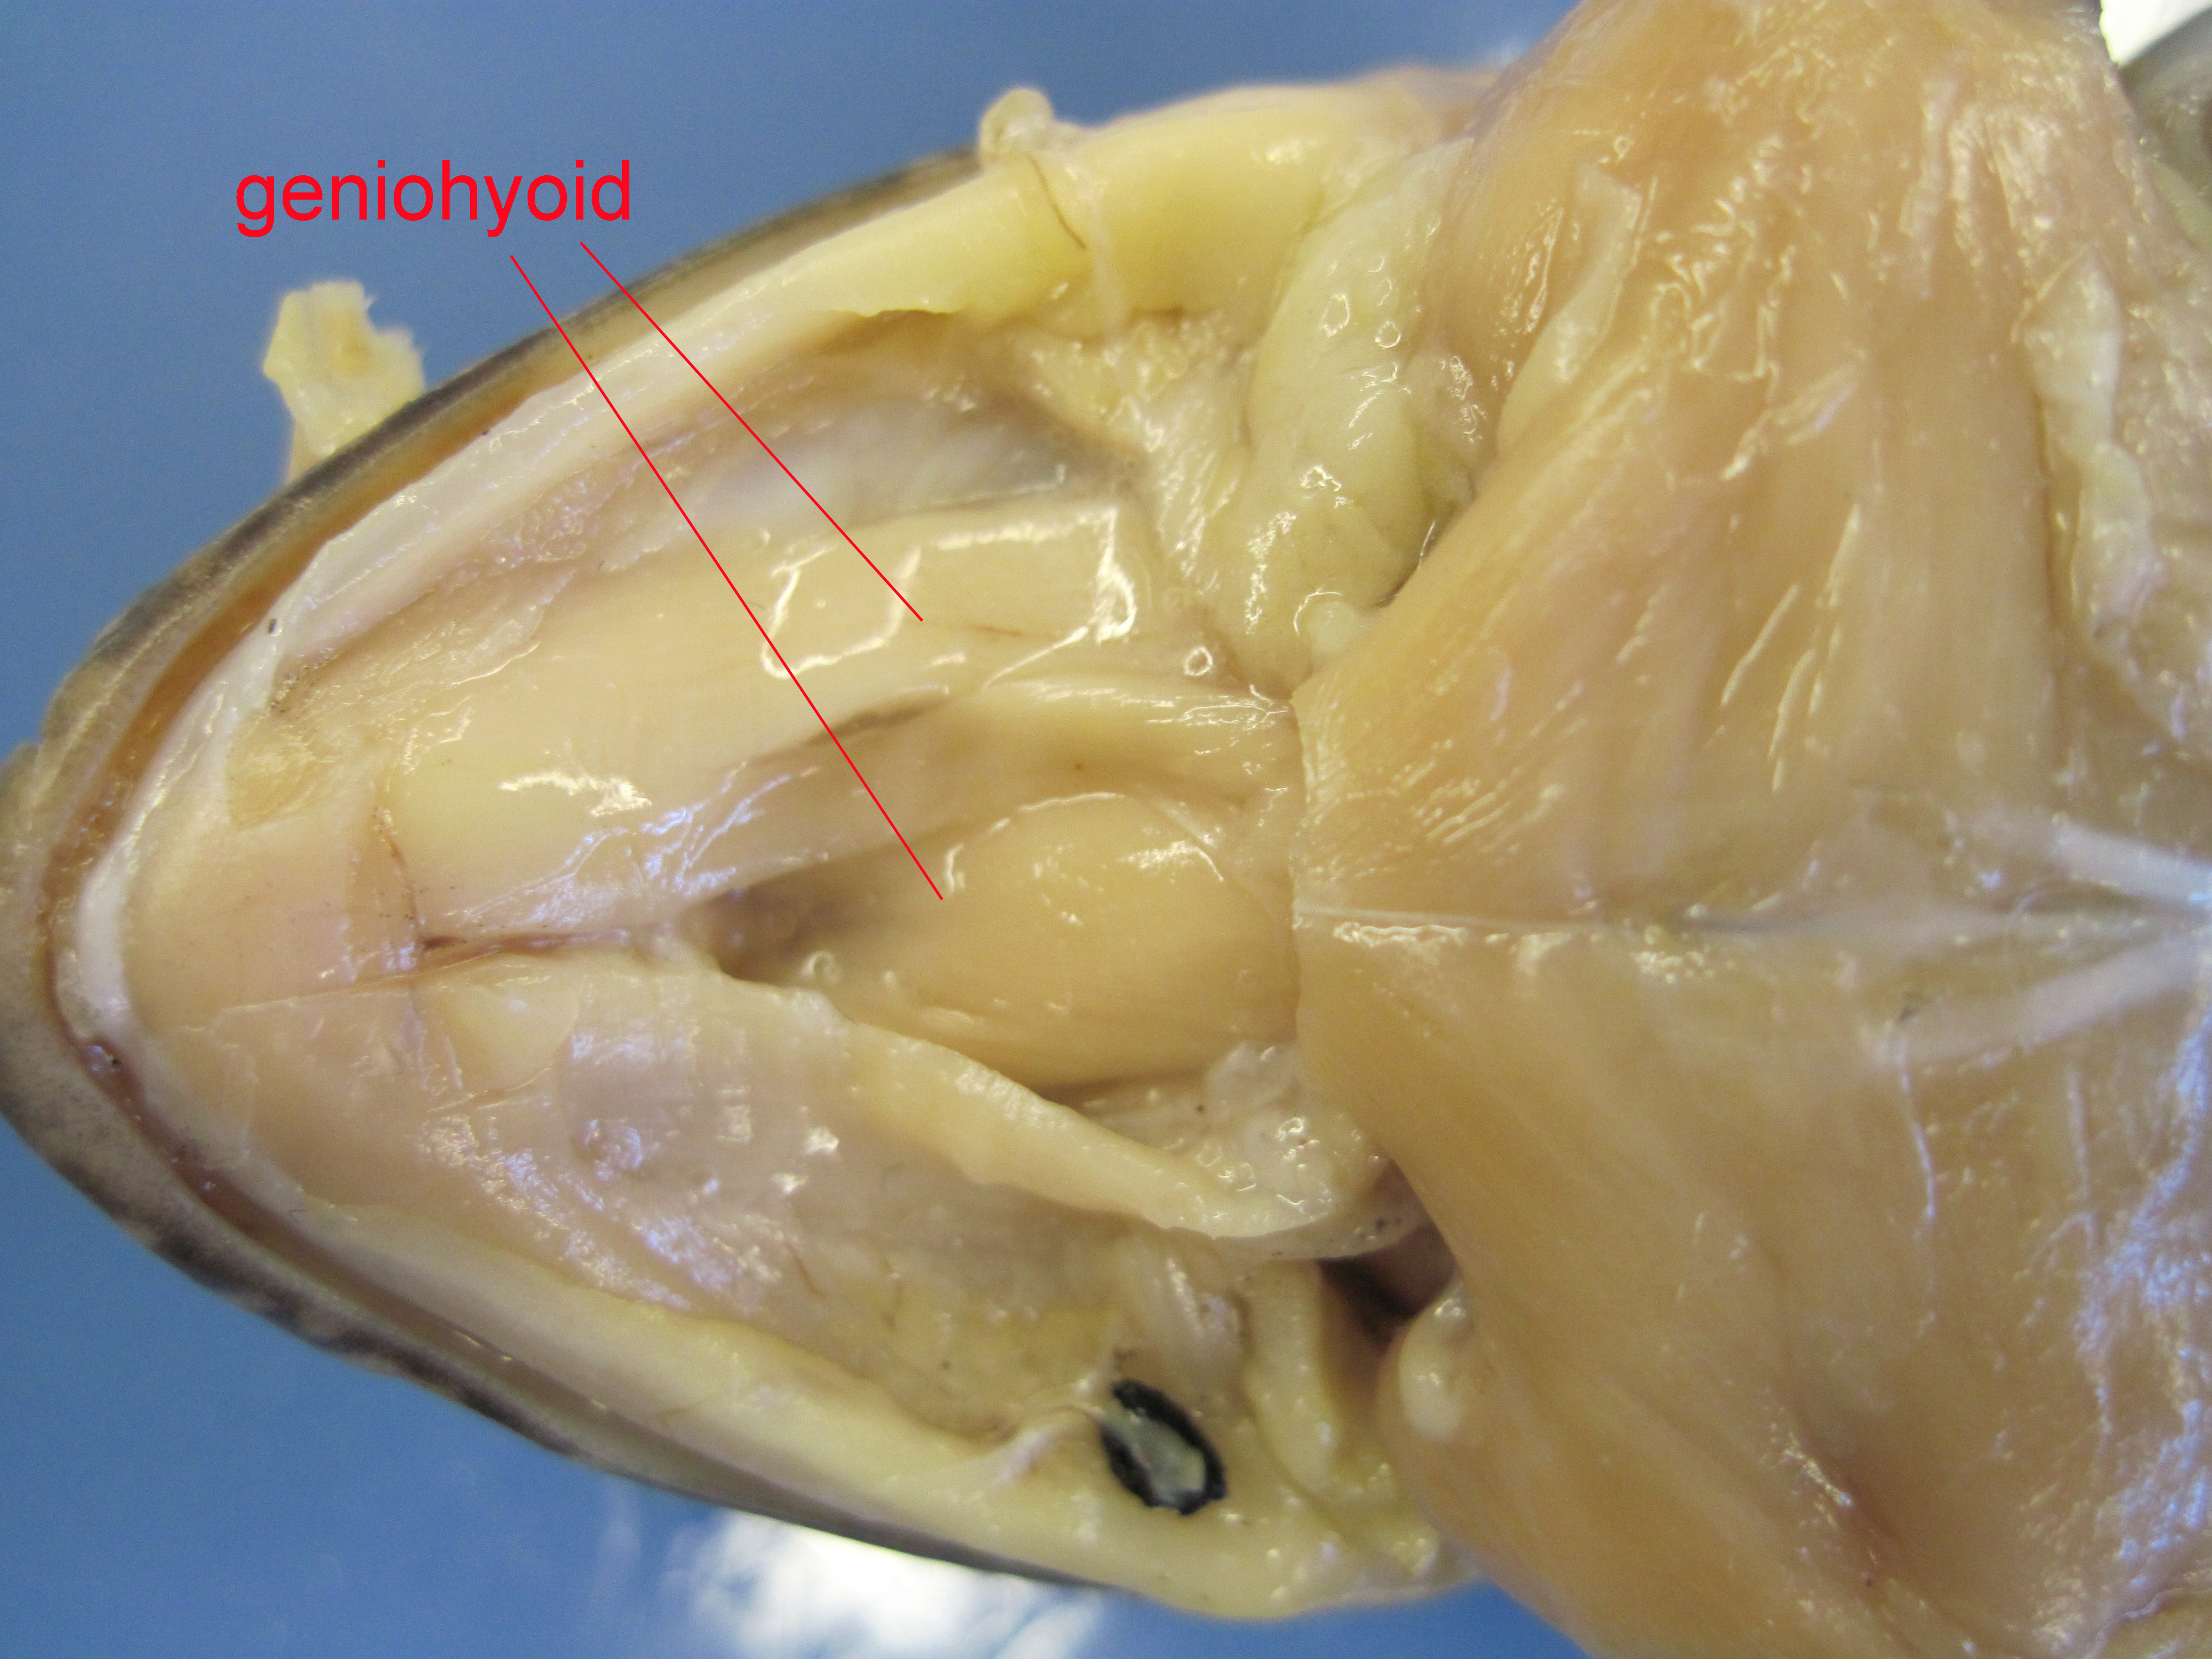 Frog geniohyoid and submental (labeled)